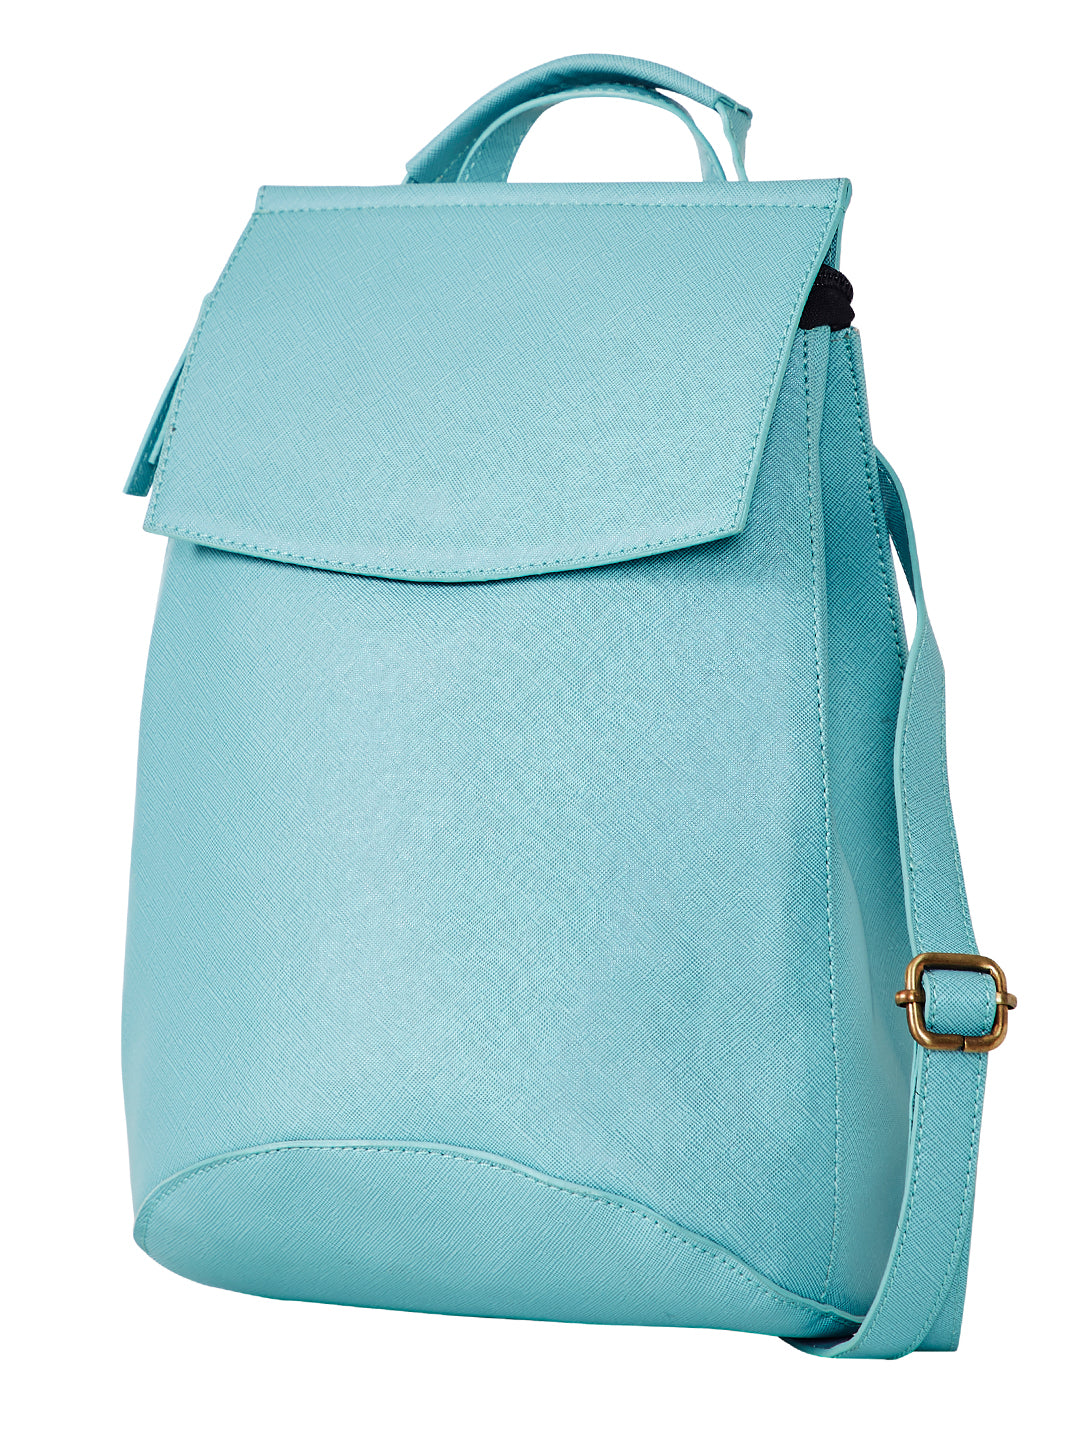 Mona B Convertible Daypack for Offices Schools and Colleges with Stylish Design for Women: Turquoise